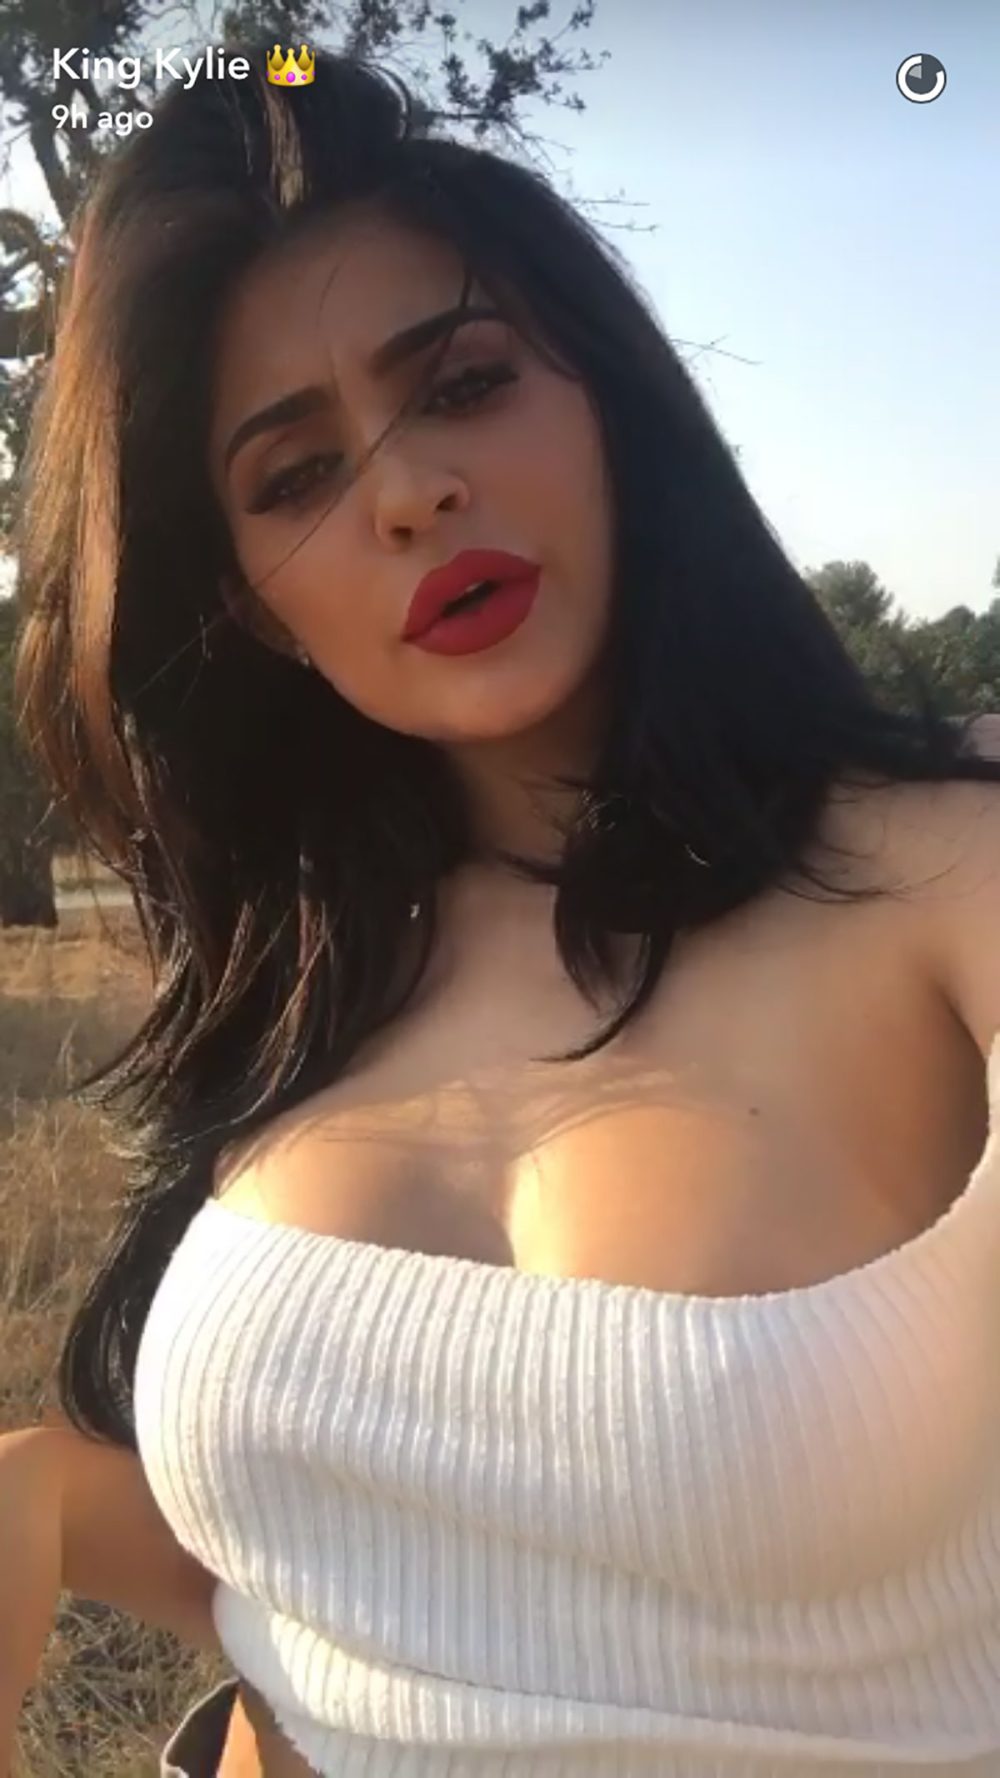 Kylie Jenner shares eye-popping snap of herself in Gucci bra after